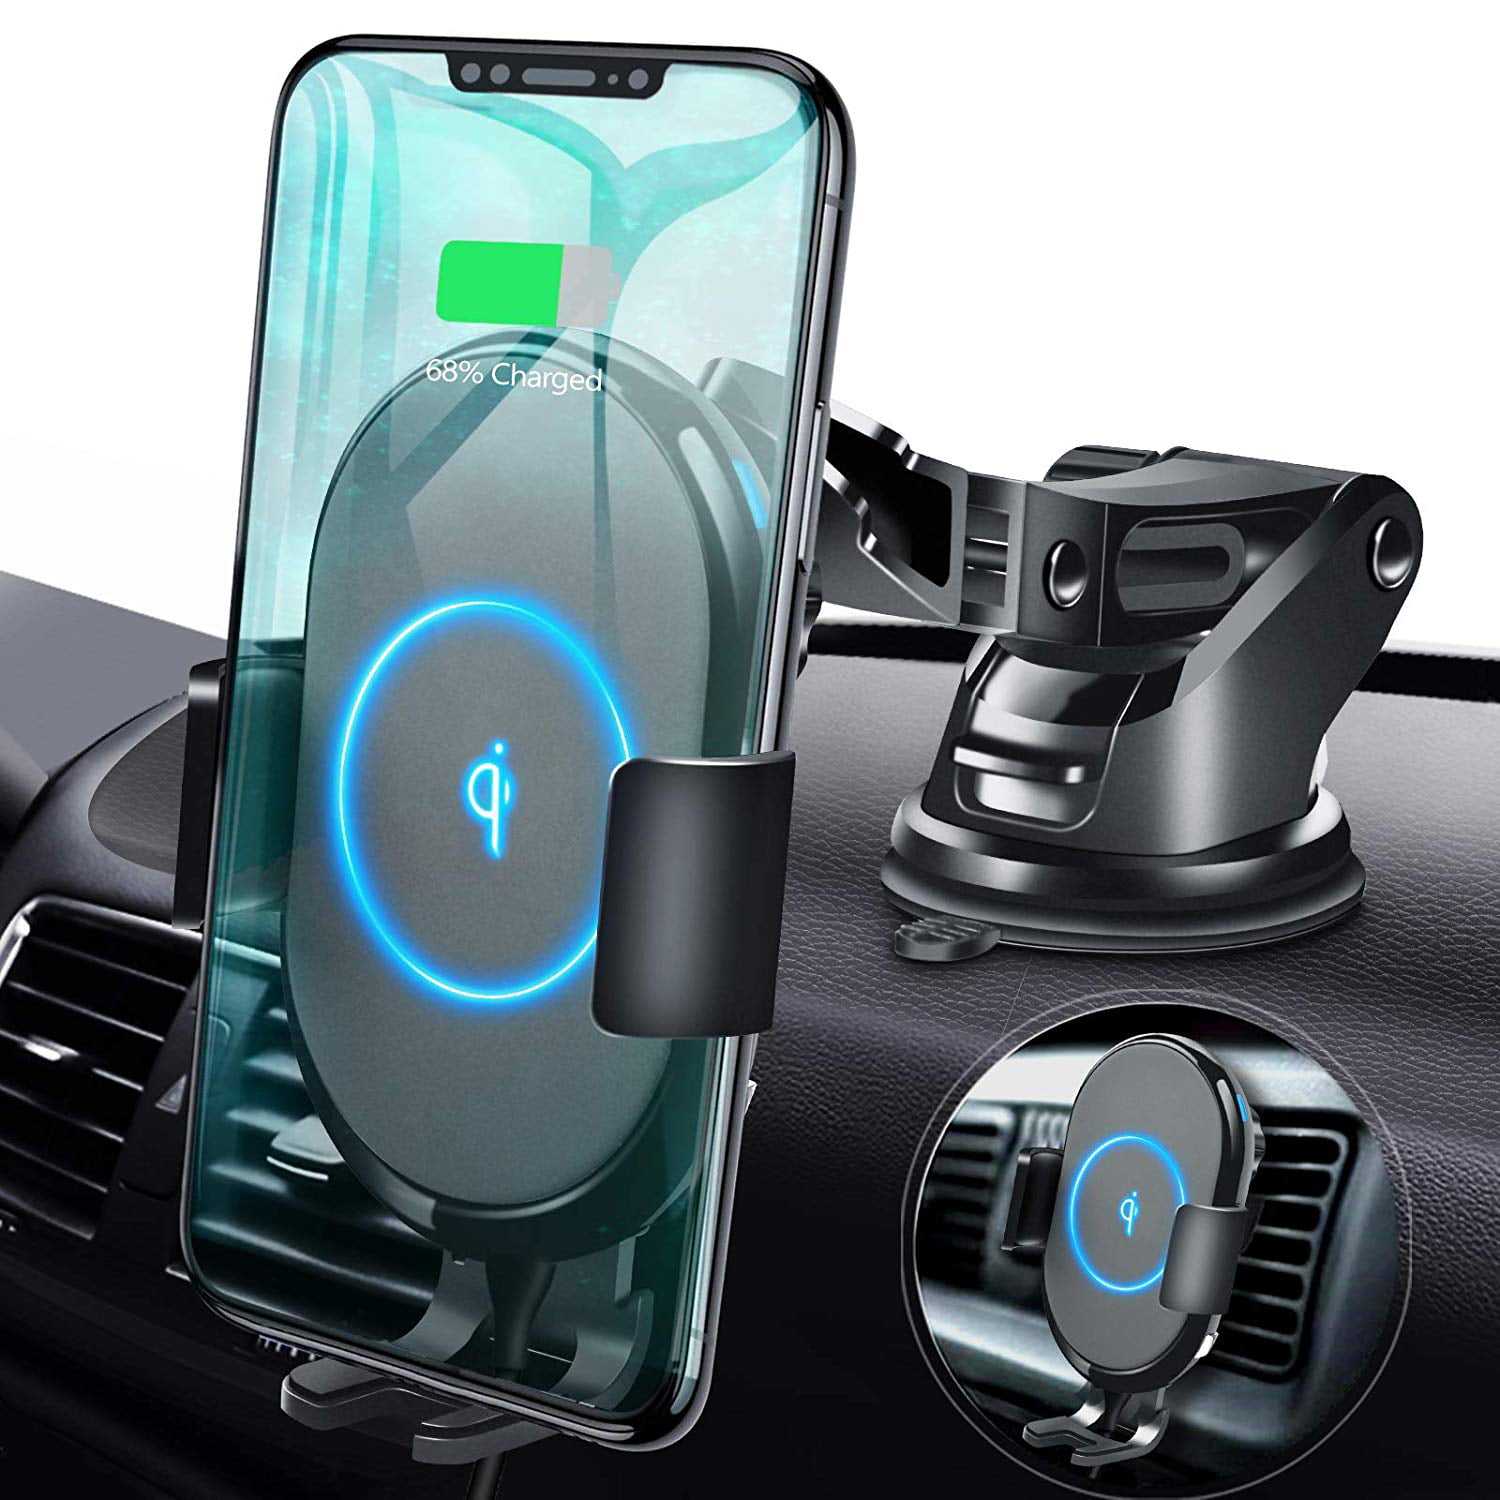 S8 Note 9 Samsung Galaxy S10 S10+S9 S9 Wireless Car Charger Mount 10W Qi Fast Charging Auto Clamping Car Mount Windshield Dashboard Air Vent Phone Holder for iPhone Xs Max XR X 8 8 Plus 